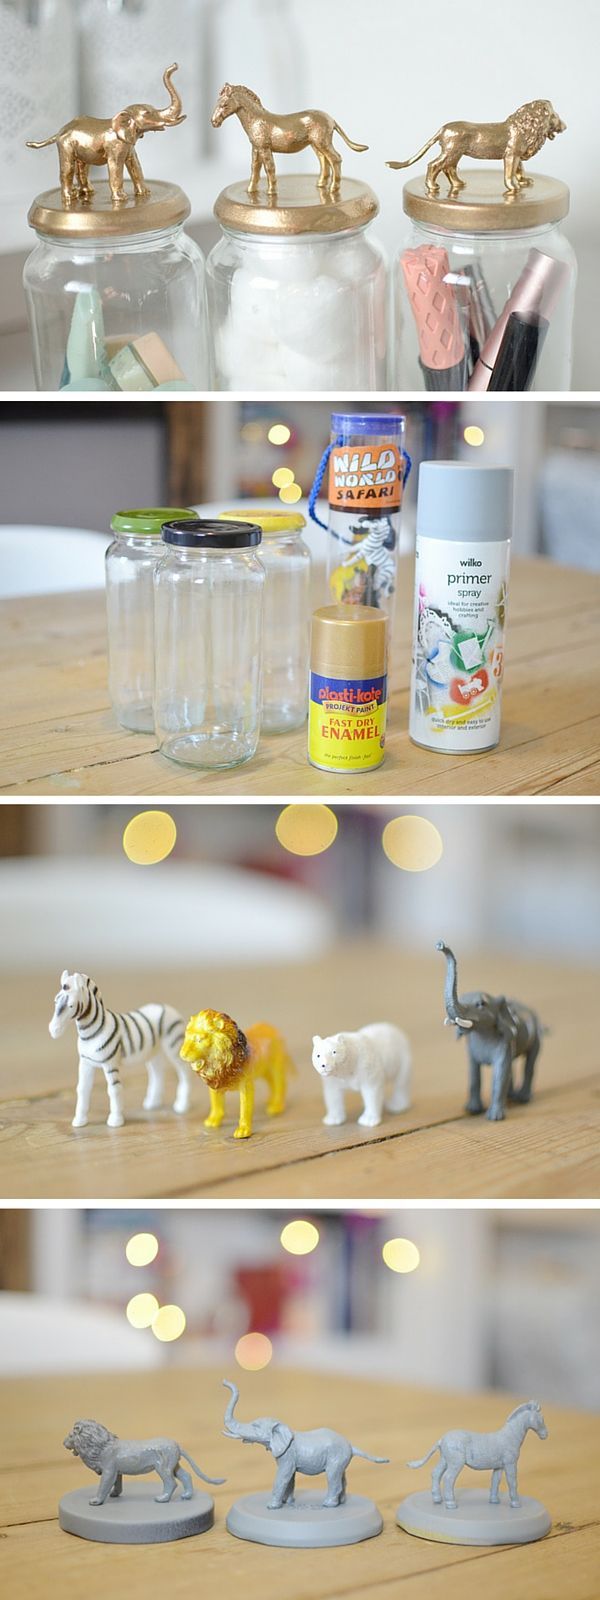 10 brilliant diy home decor ideas to makeover your home! RQGVMRP